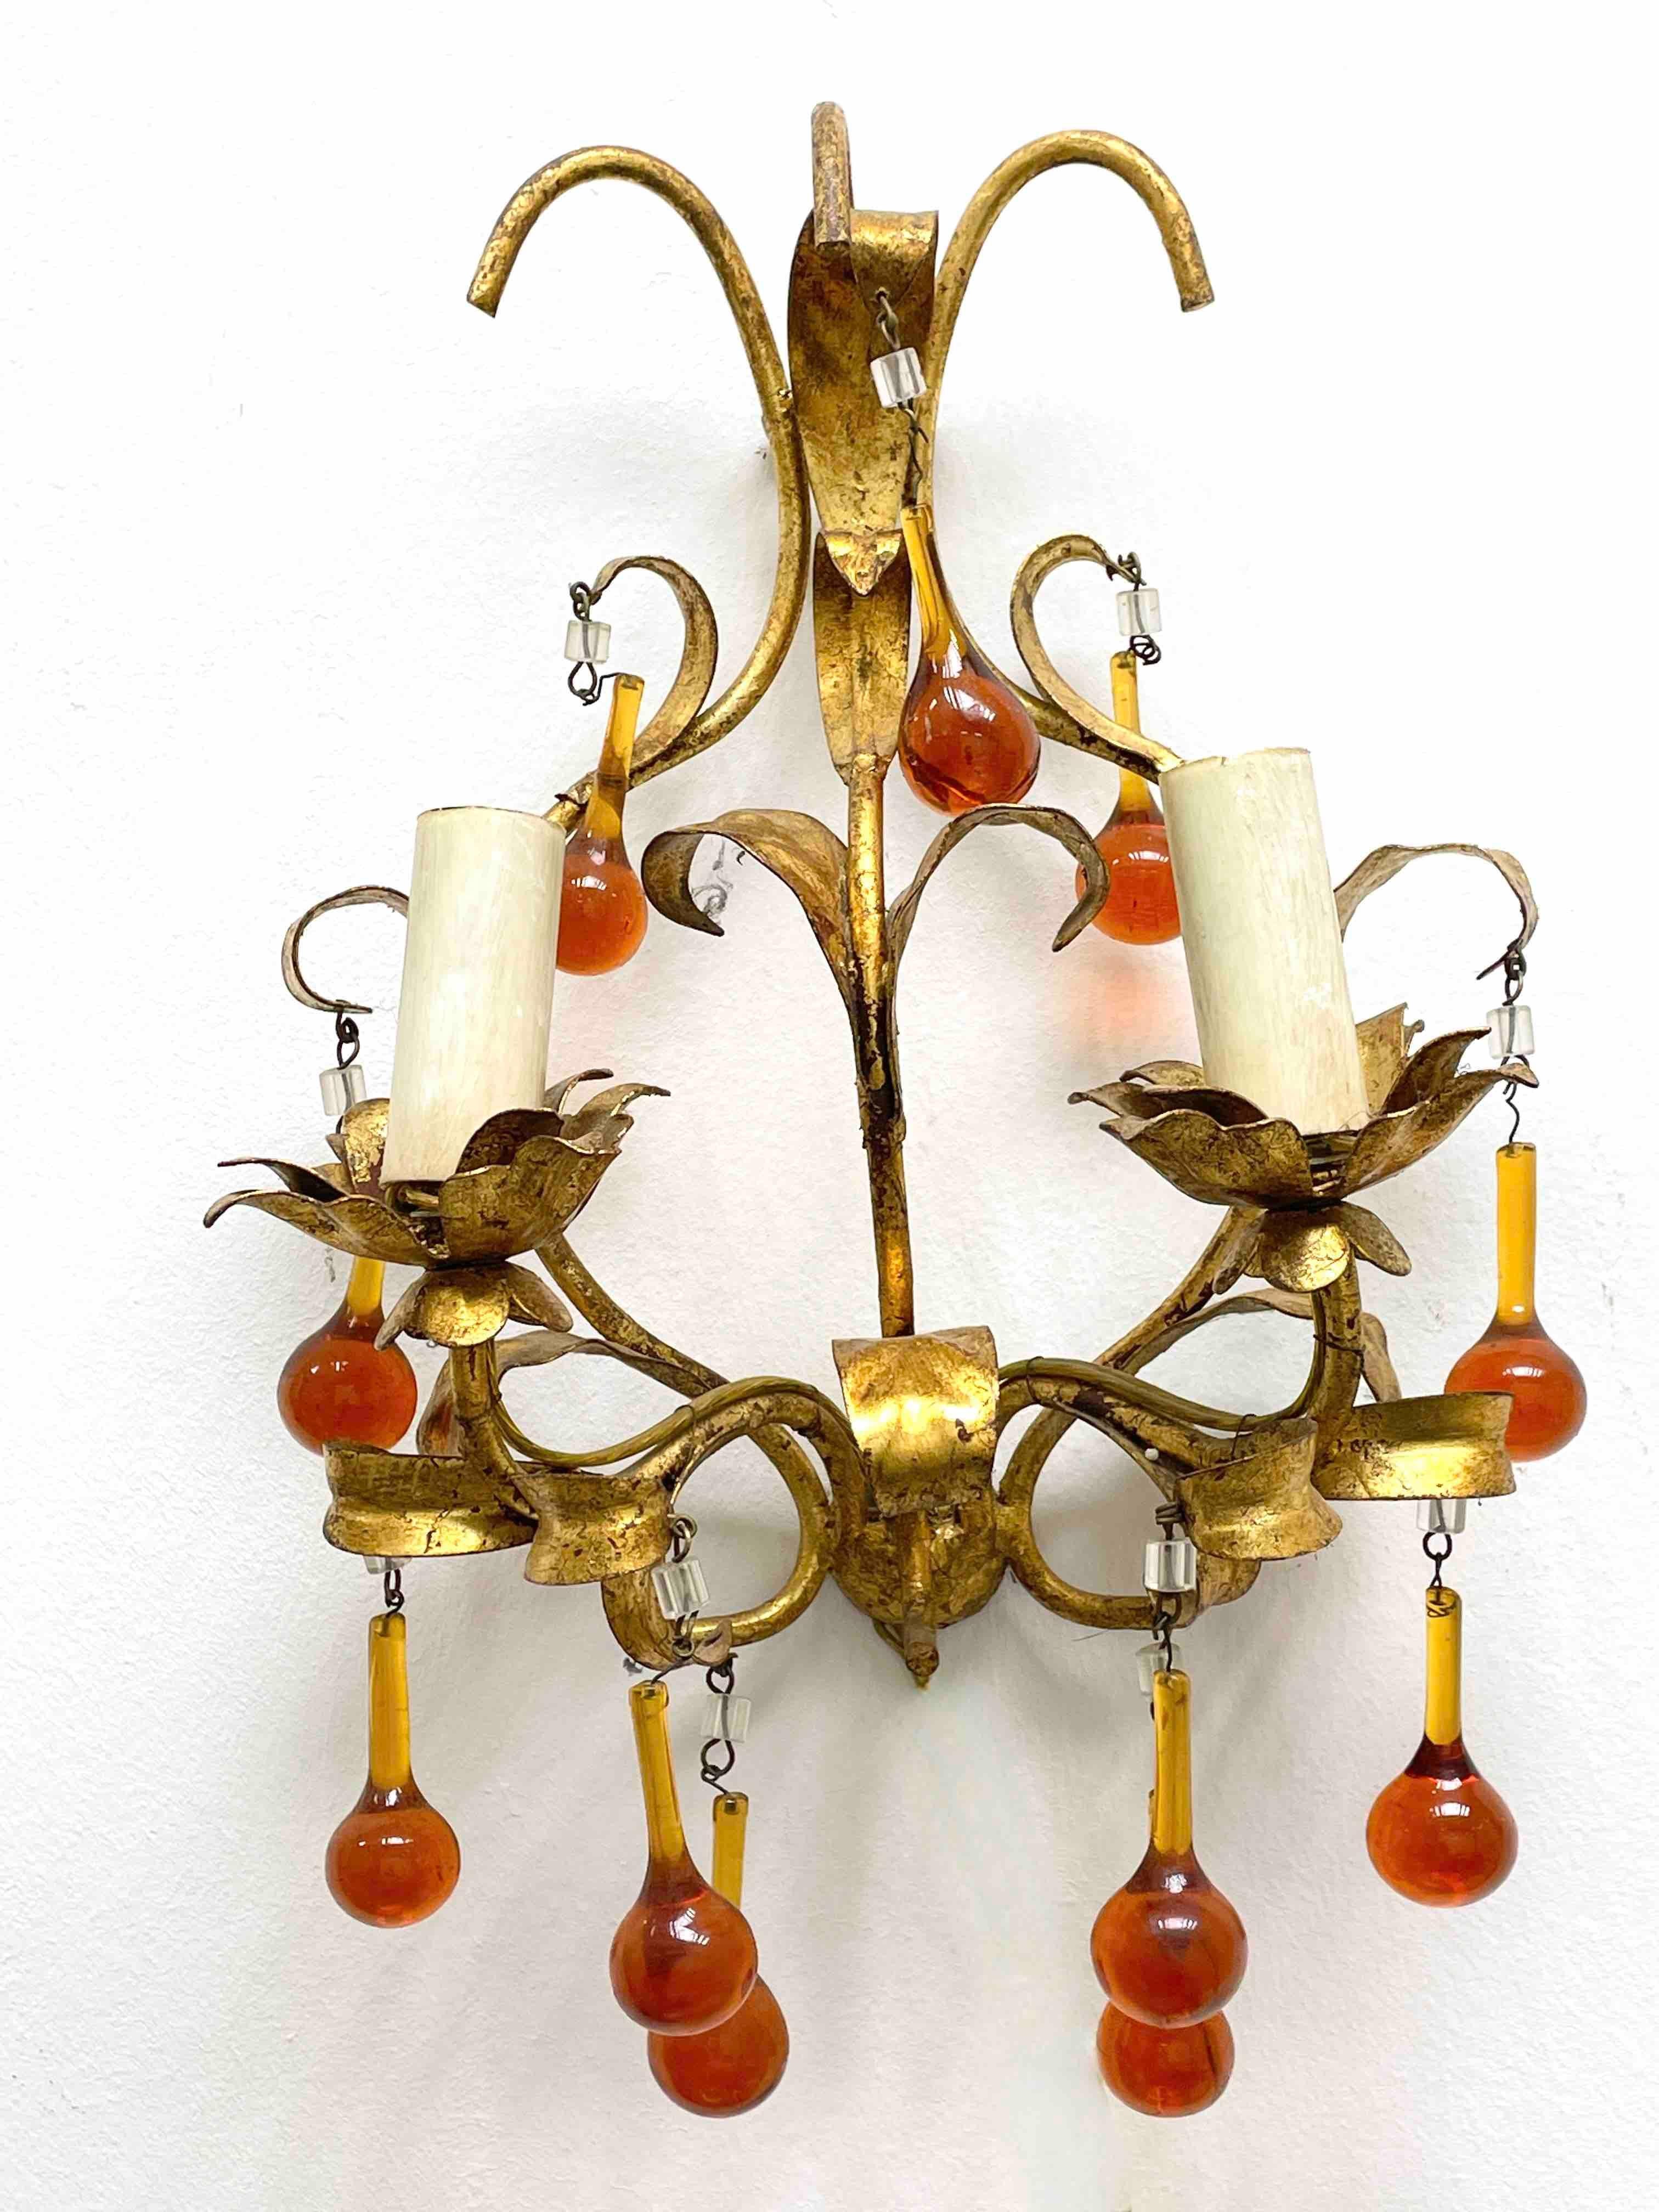 A pair Hollywood Regency midcentury gilt tole leaf sconces with glass drops, each fixture requires two European E14 candelabra bulbs, up to 40 watts each socket. The wall lights have a beautiful patina and gives each room a eclectic statement.